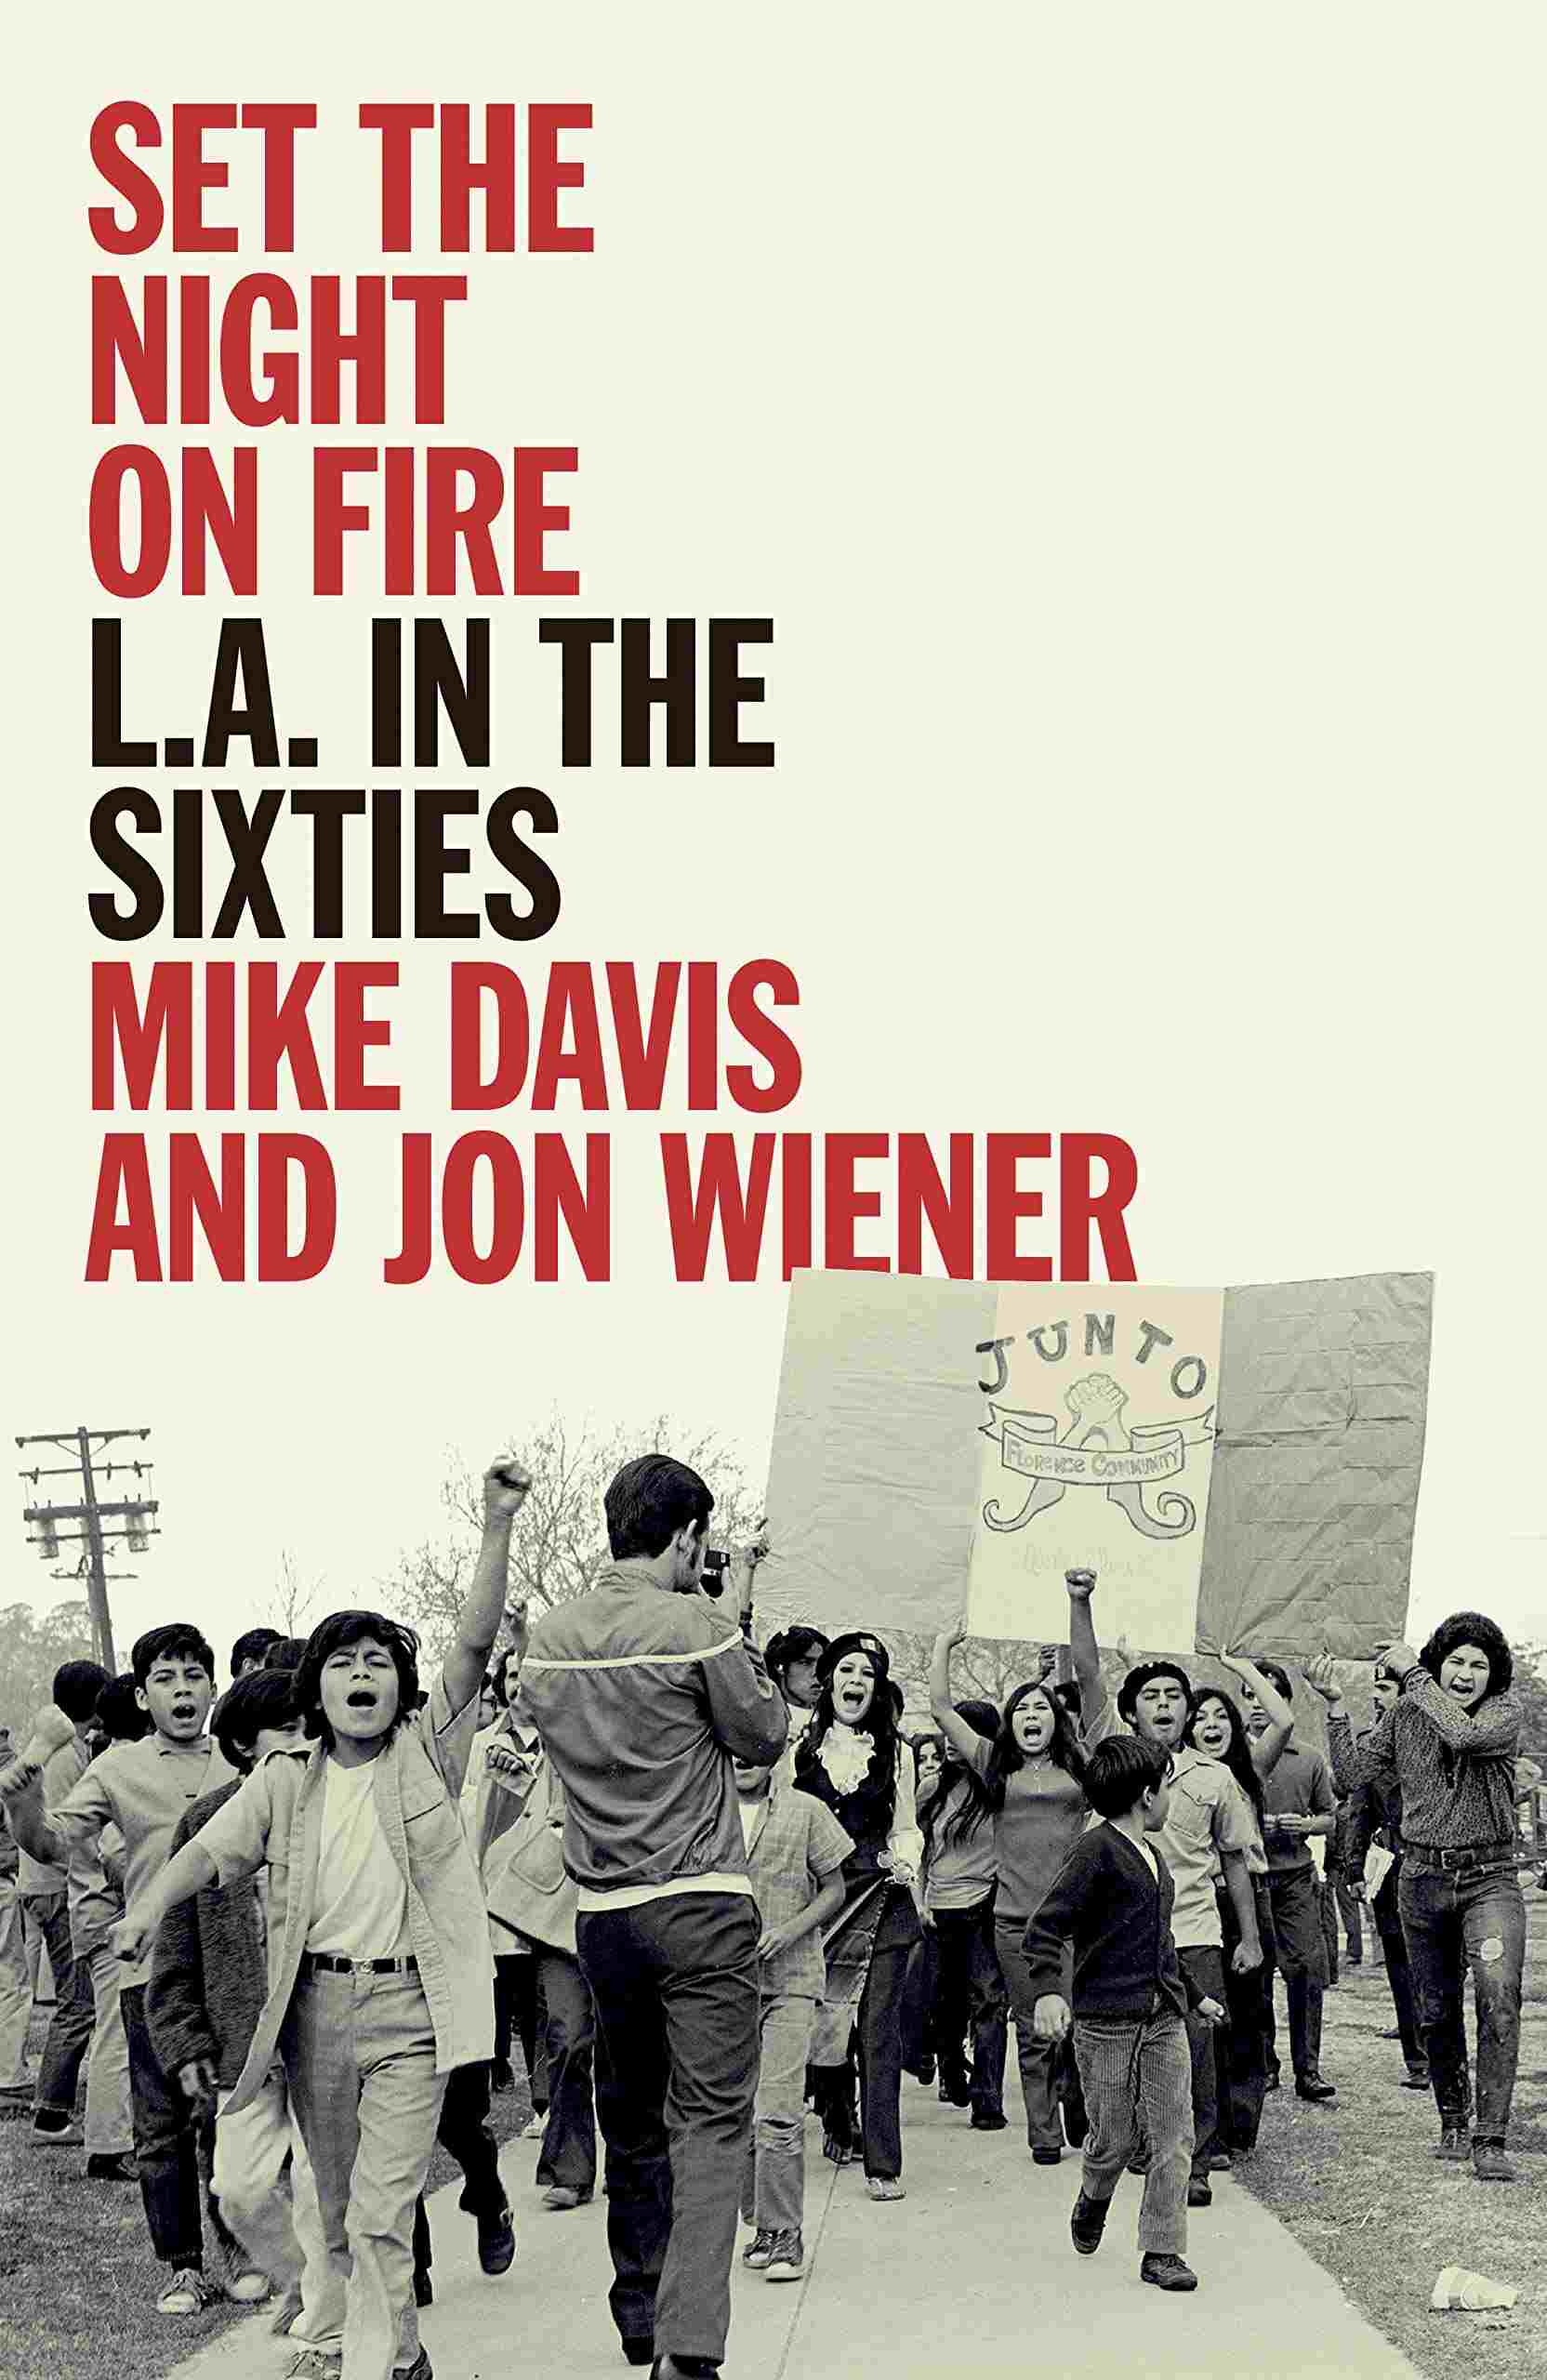 Set the Night on Fire: L.A. in the Sixties by Jon Wiener and Mike Davis